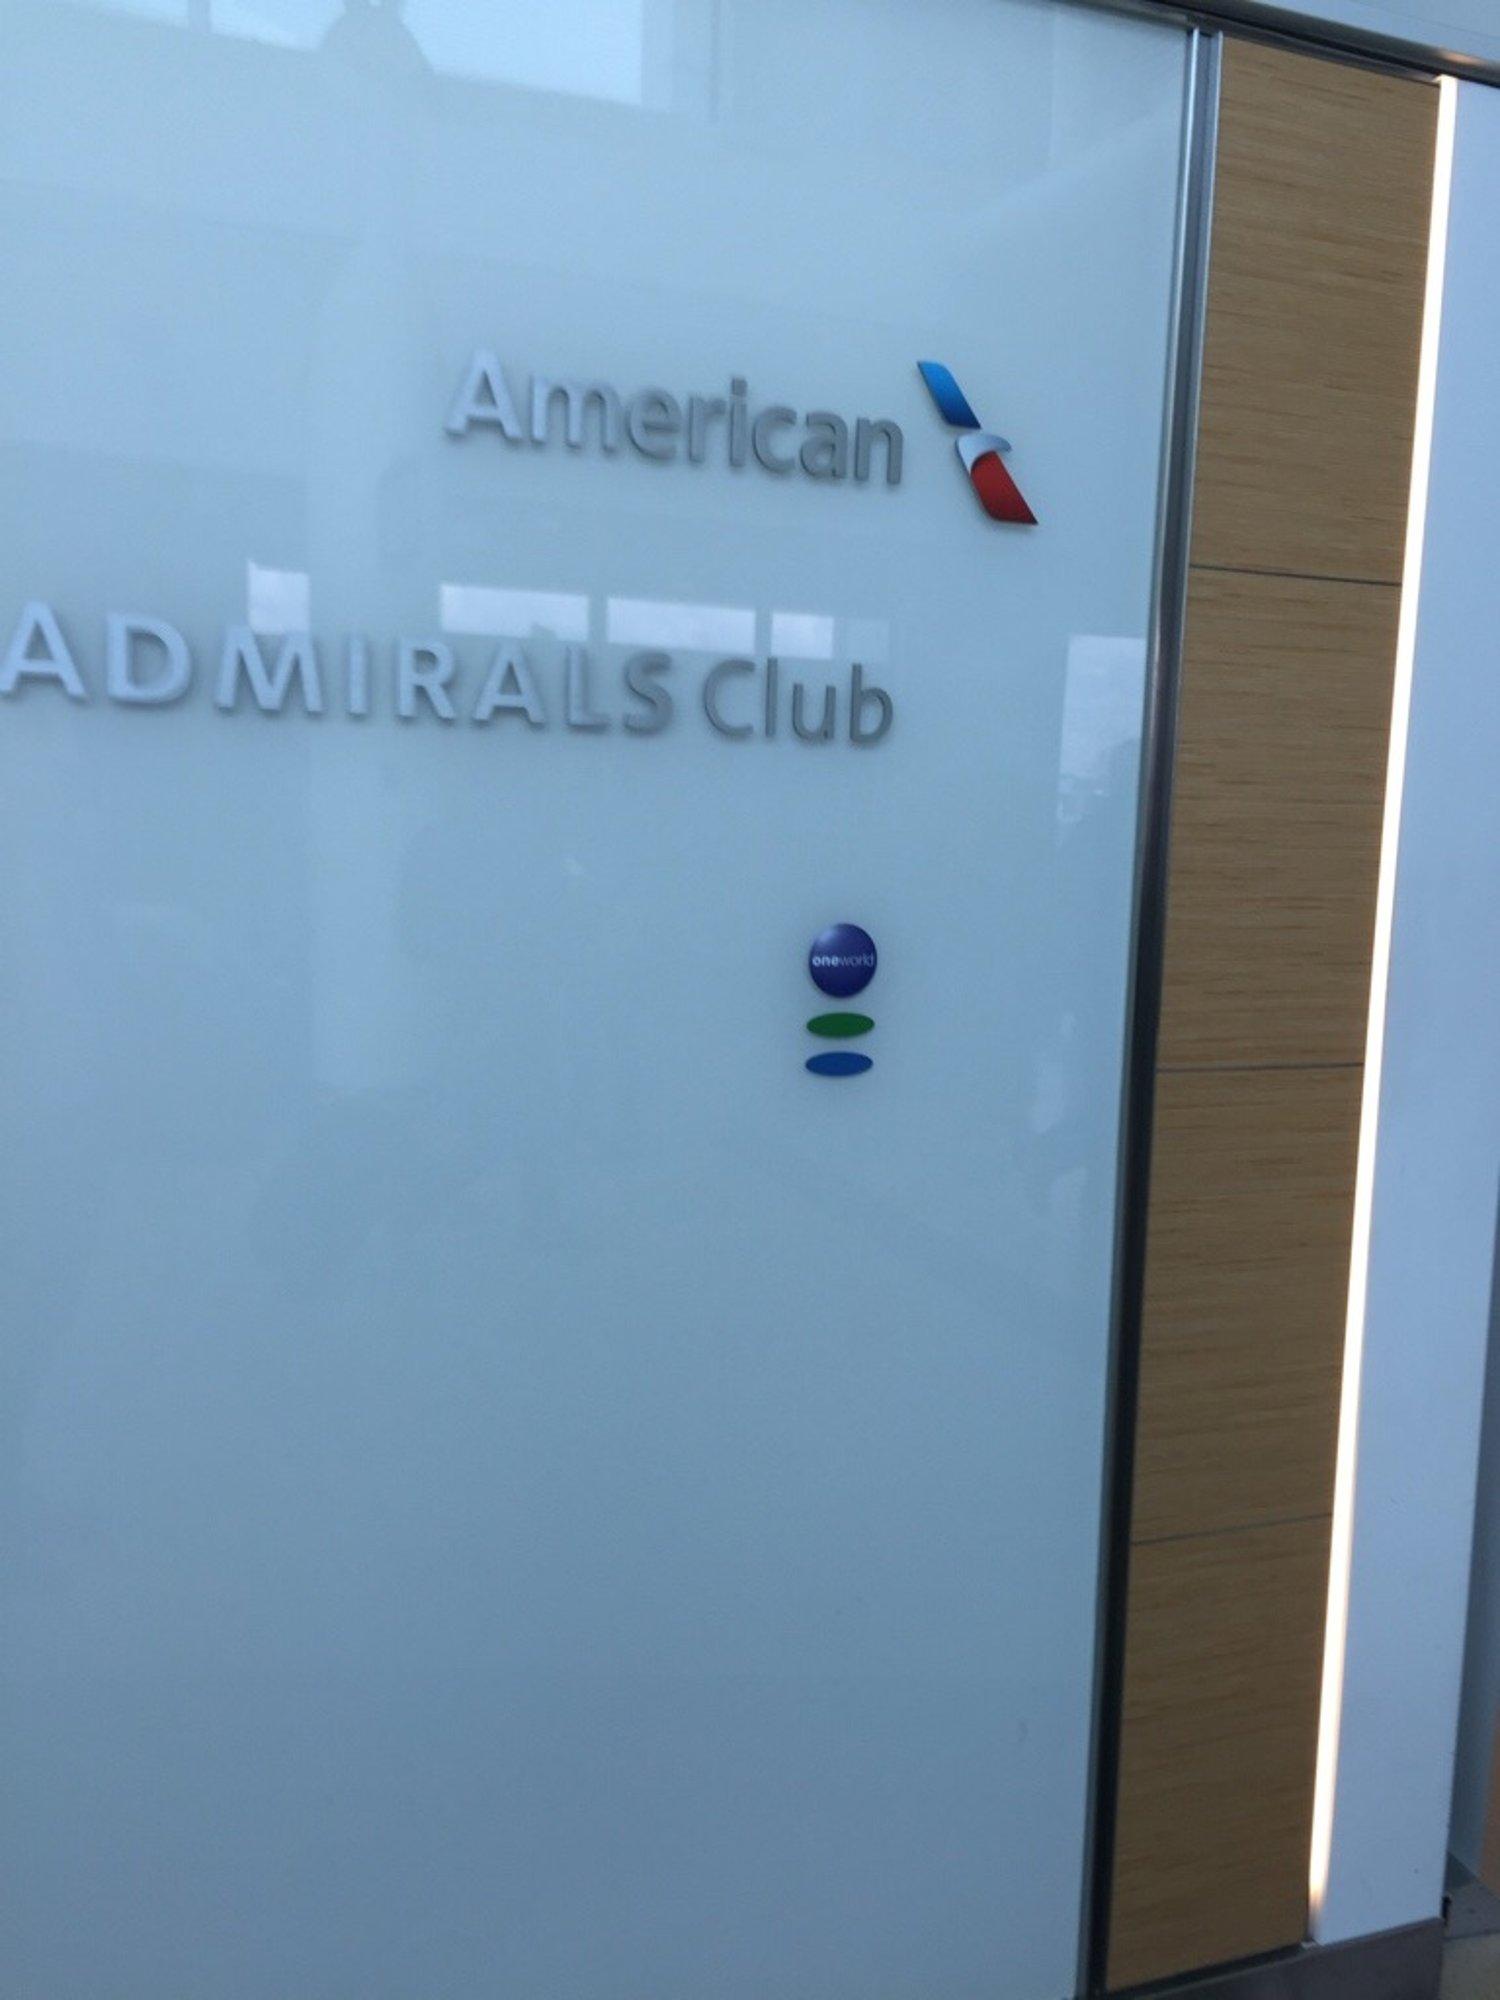 American Airlines Admirals Club image 39 of 50